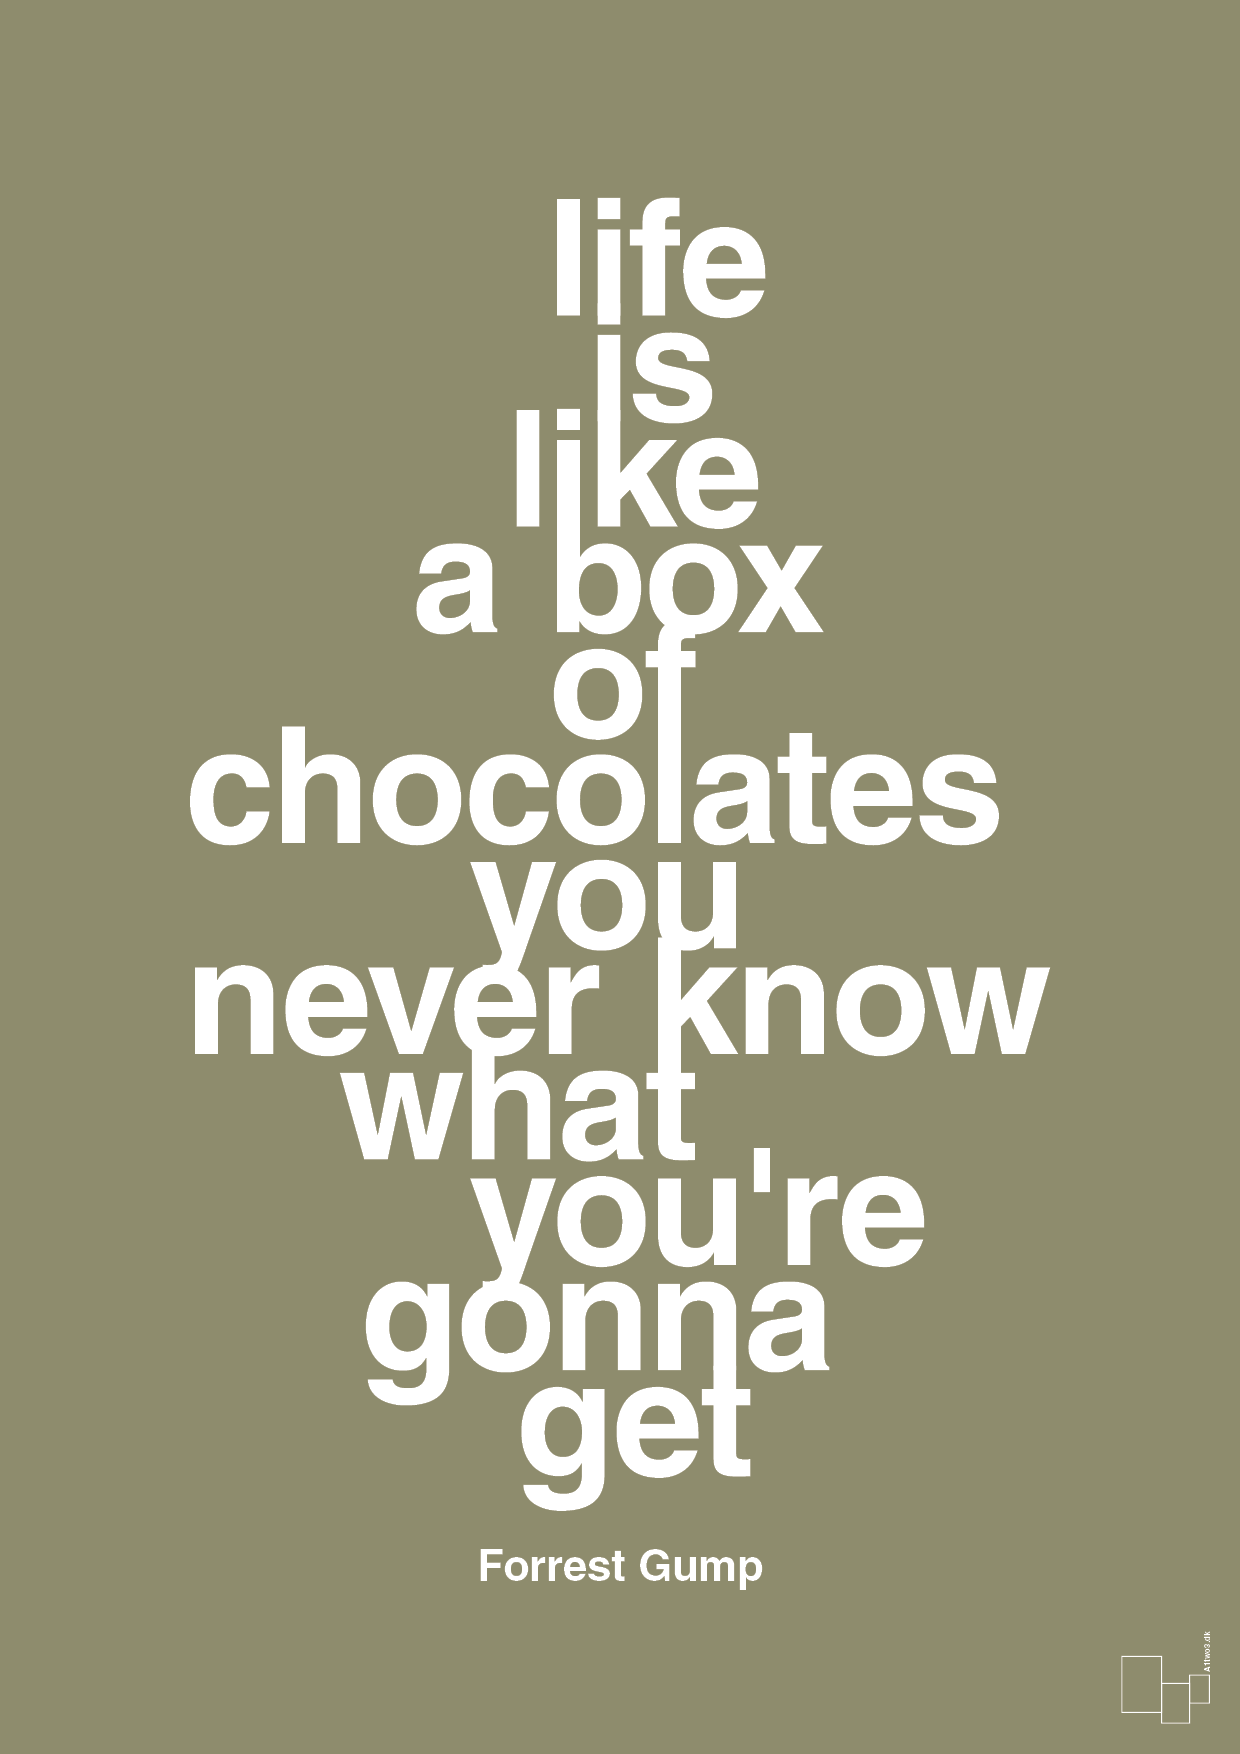 life is like a box of chocolates you never know what you're gonna get - Plakat med Citater i Misty Forrest